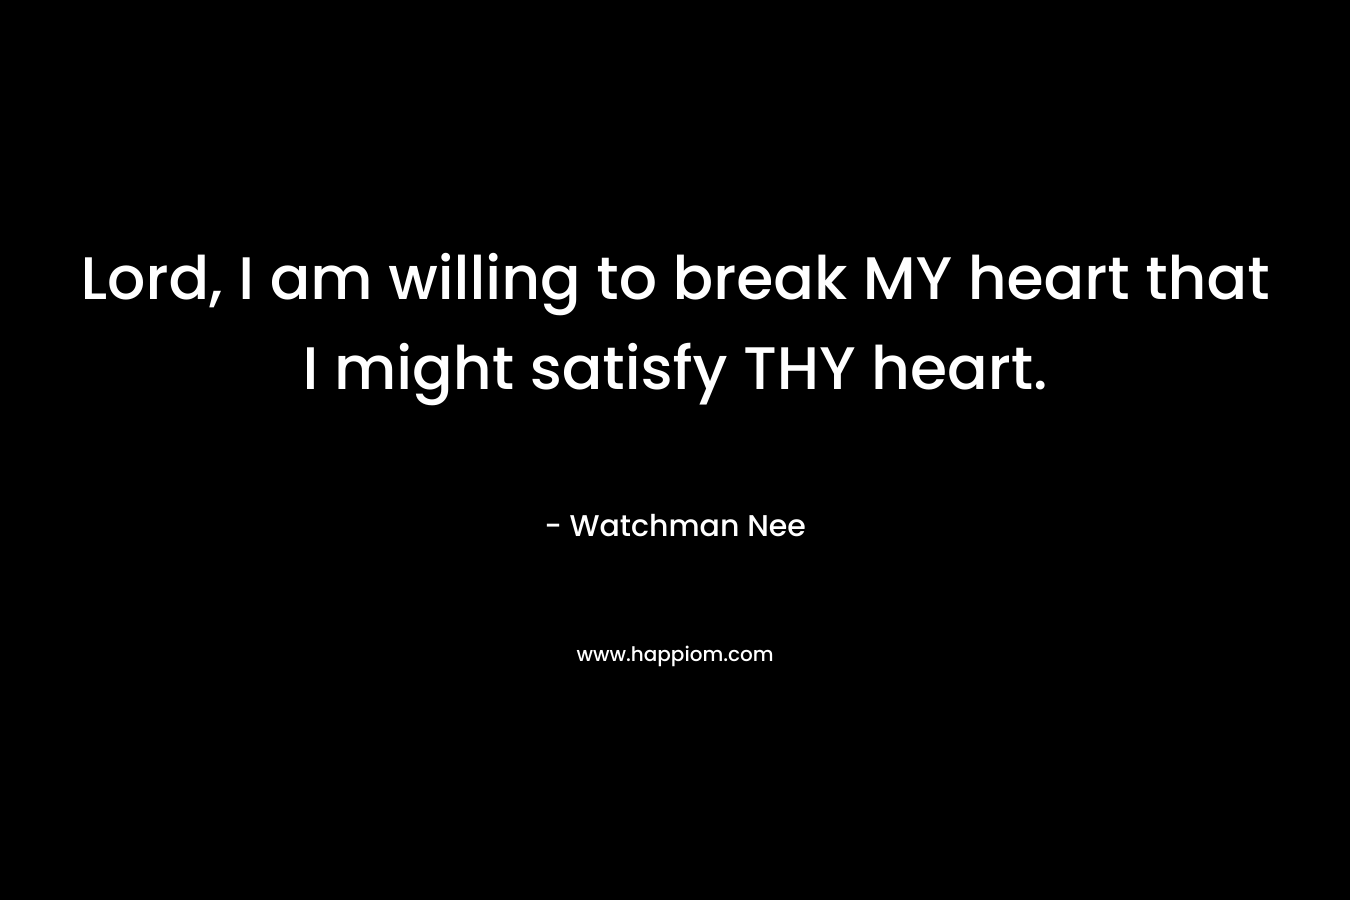 Lord, I am willing to break MY heart that I might satisfy THY heart. – Watchman Nee